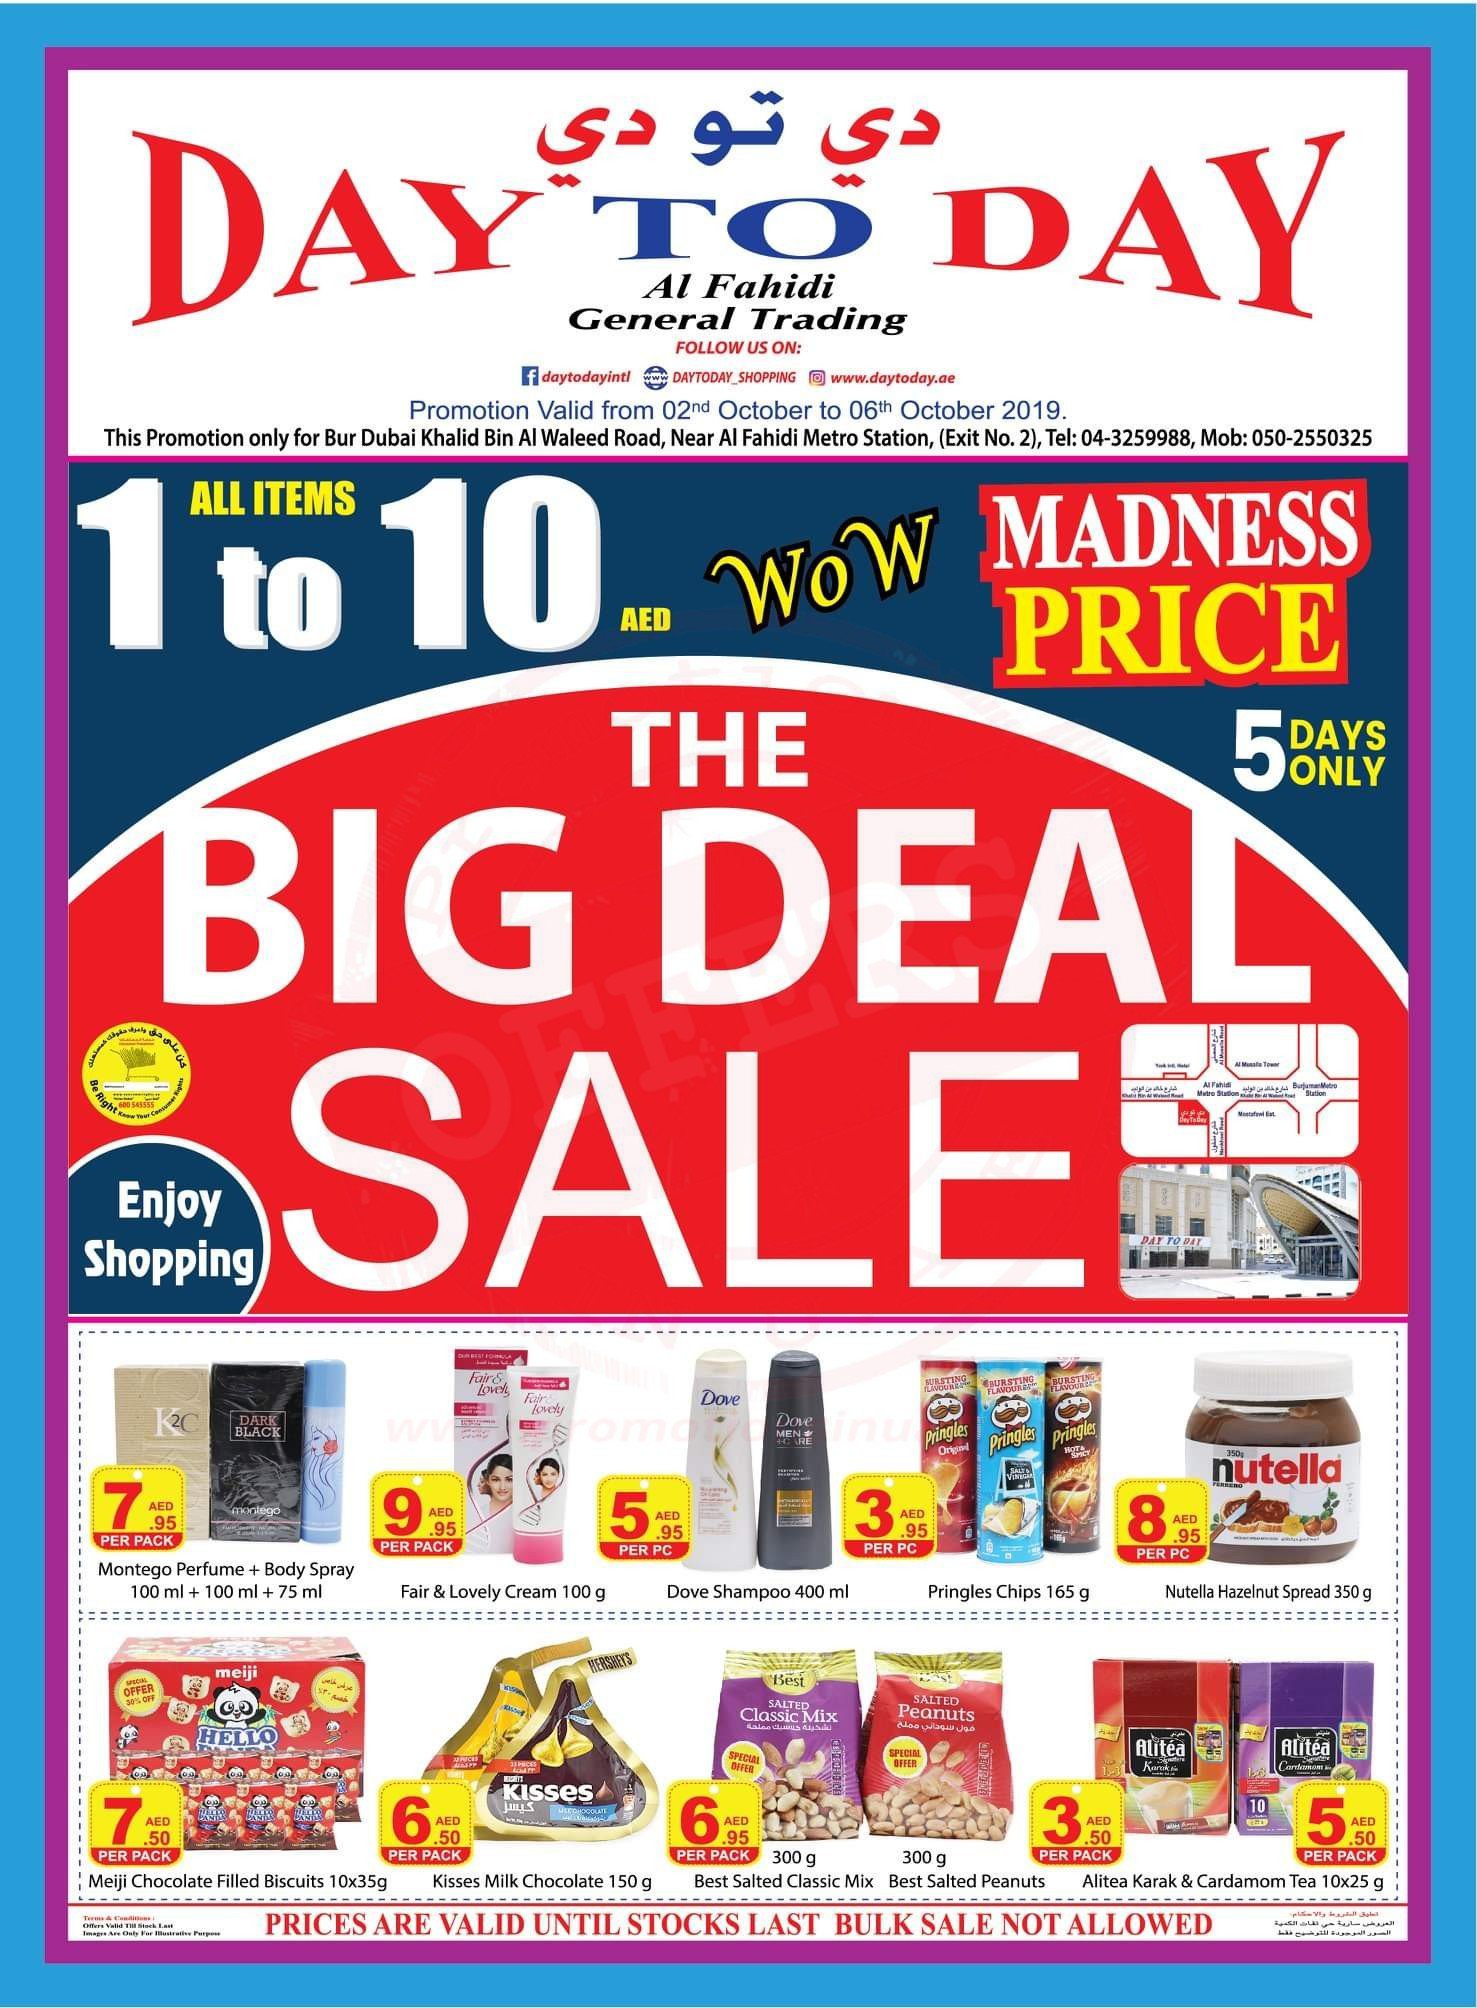 FB IMG 1569999076941 Day To Day BIG DEAL SALE.